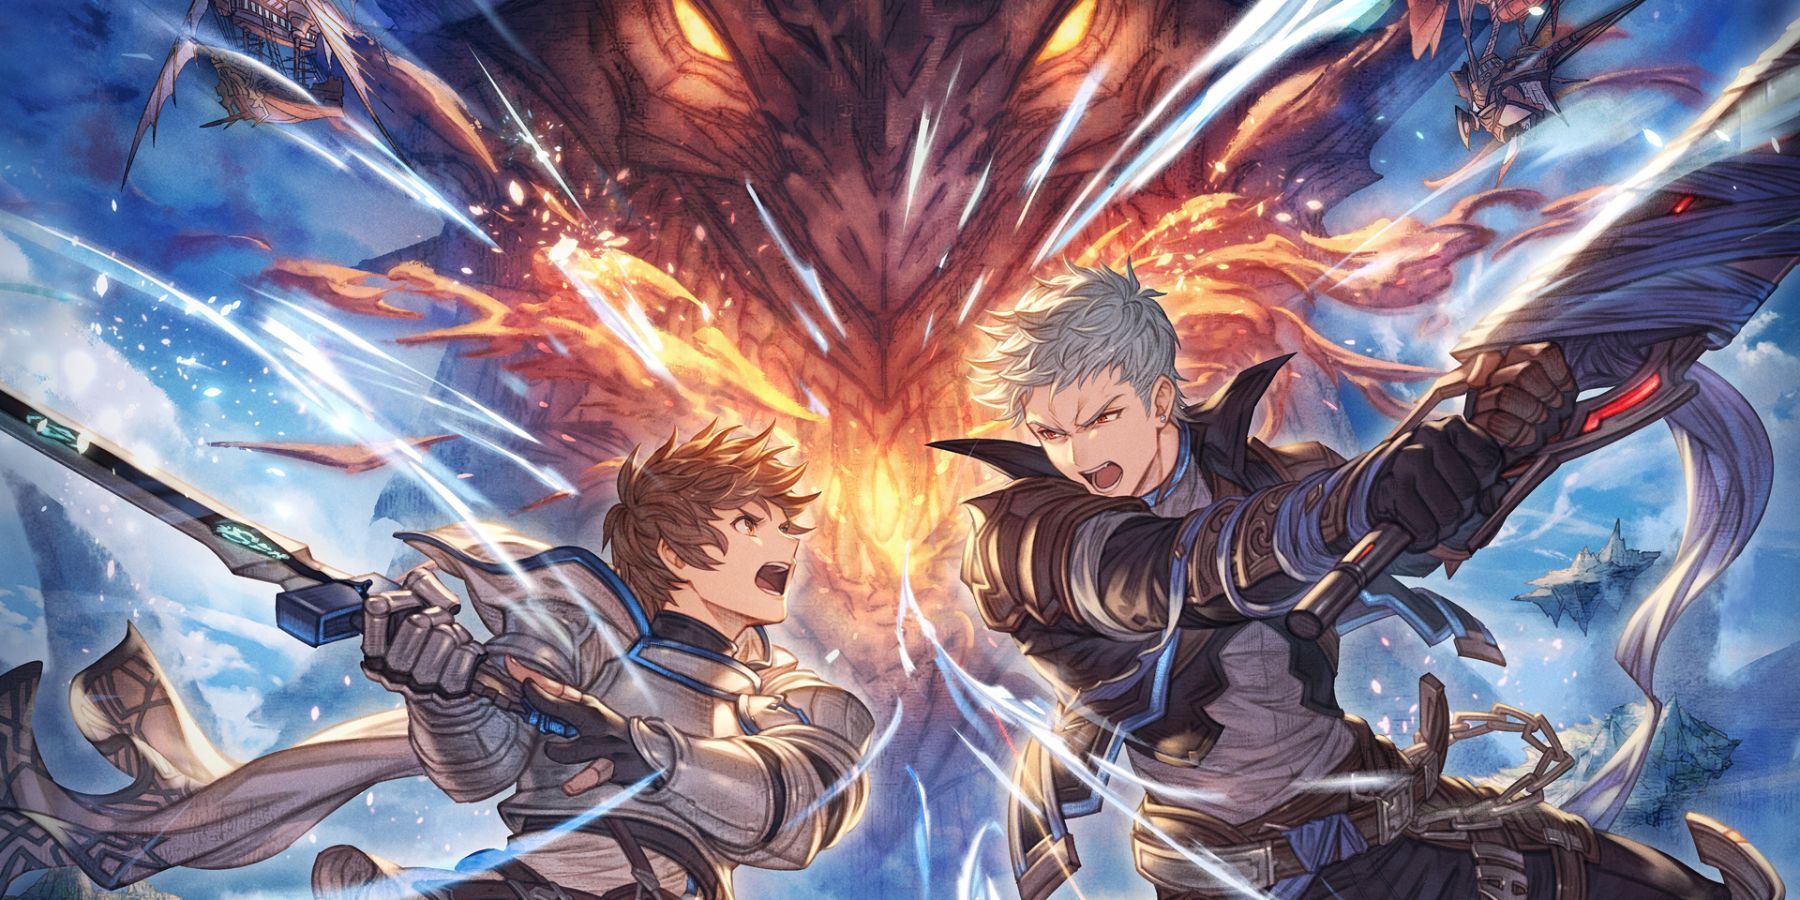 Granblue and Final Fantasy 11 Are Getting a Crossover